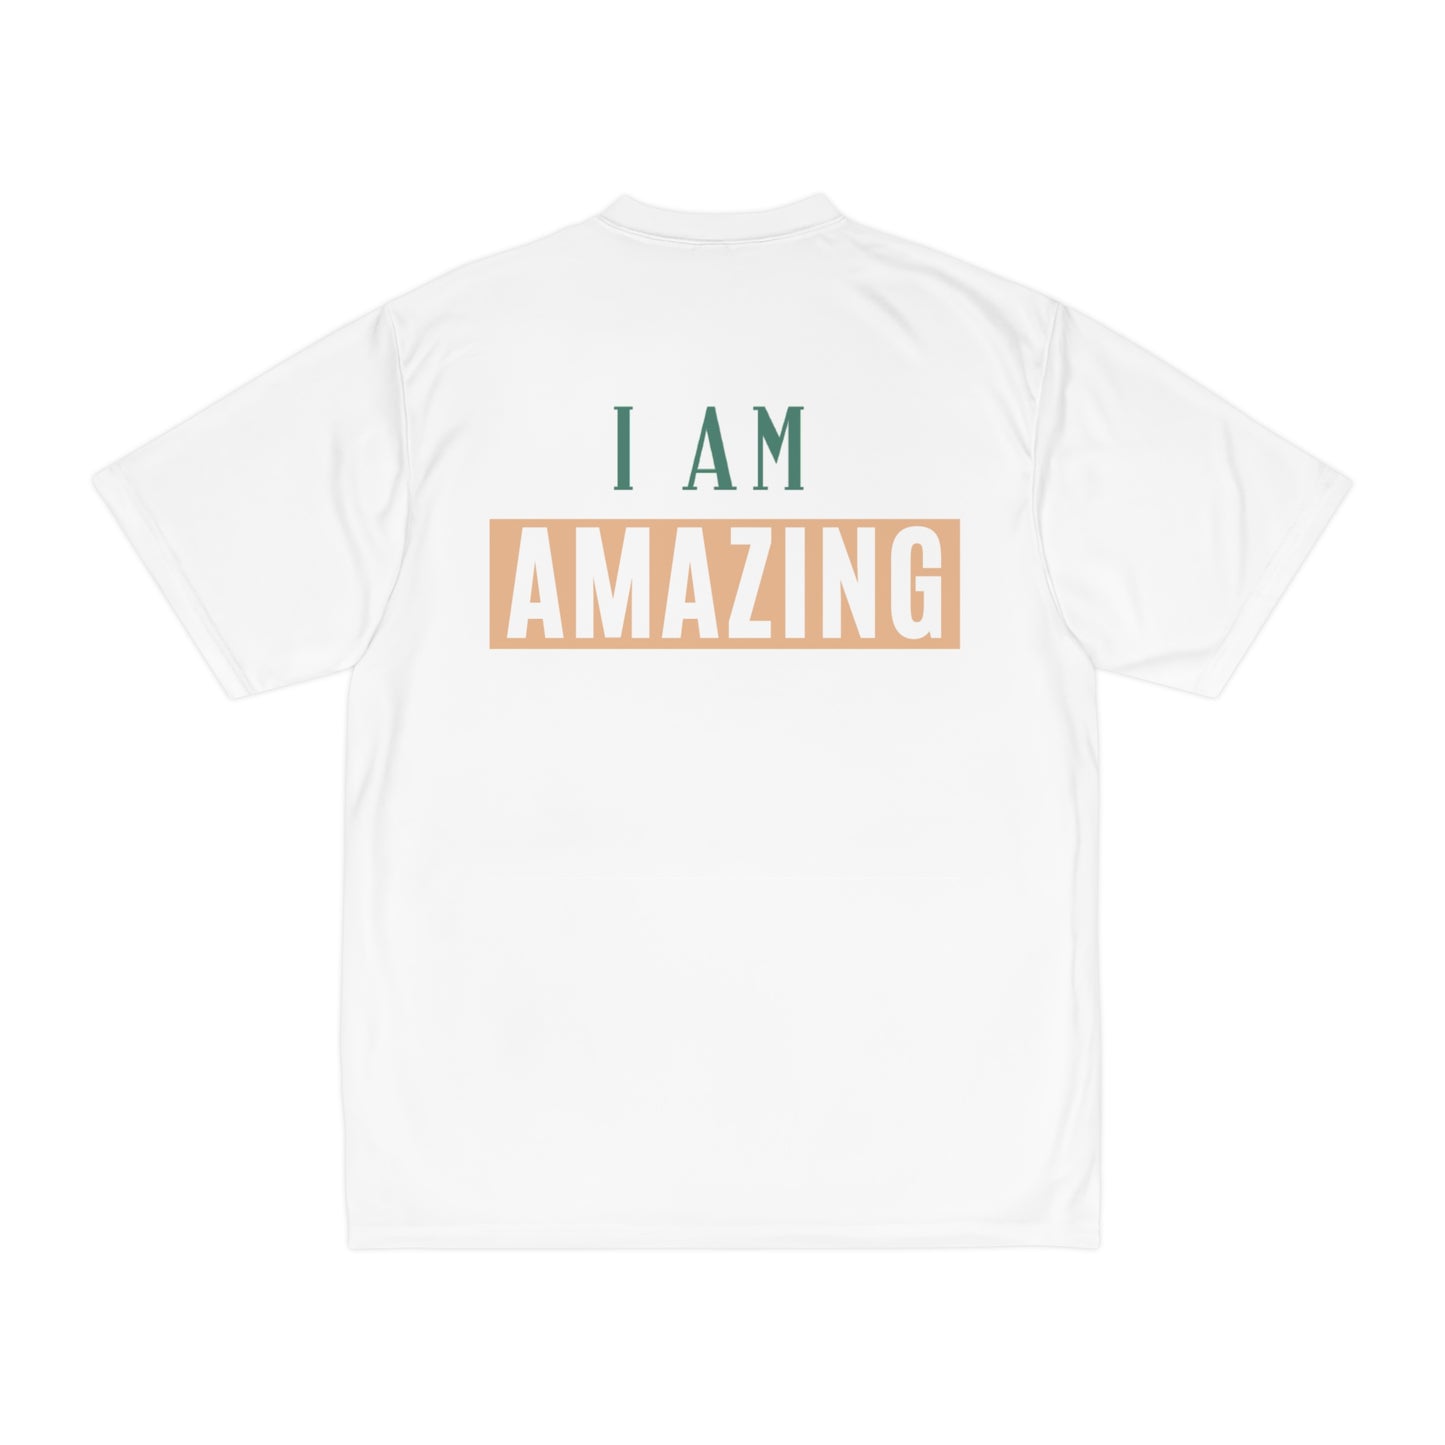 Men's Performance T-Shirt - I'm Amazing Father Brother Son Friend - Front and Back Printed Design